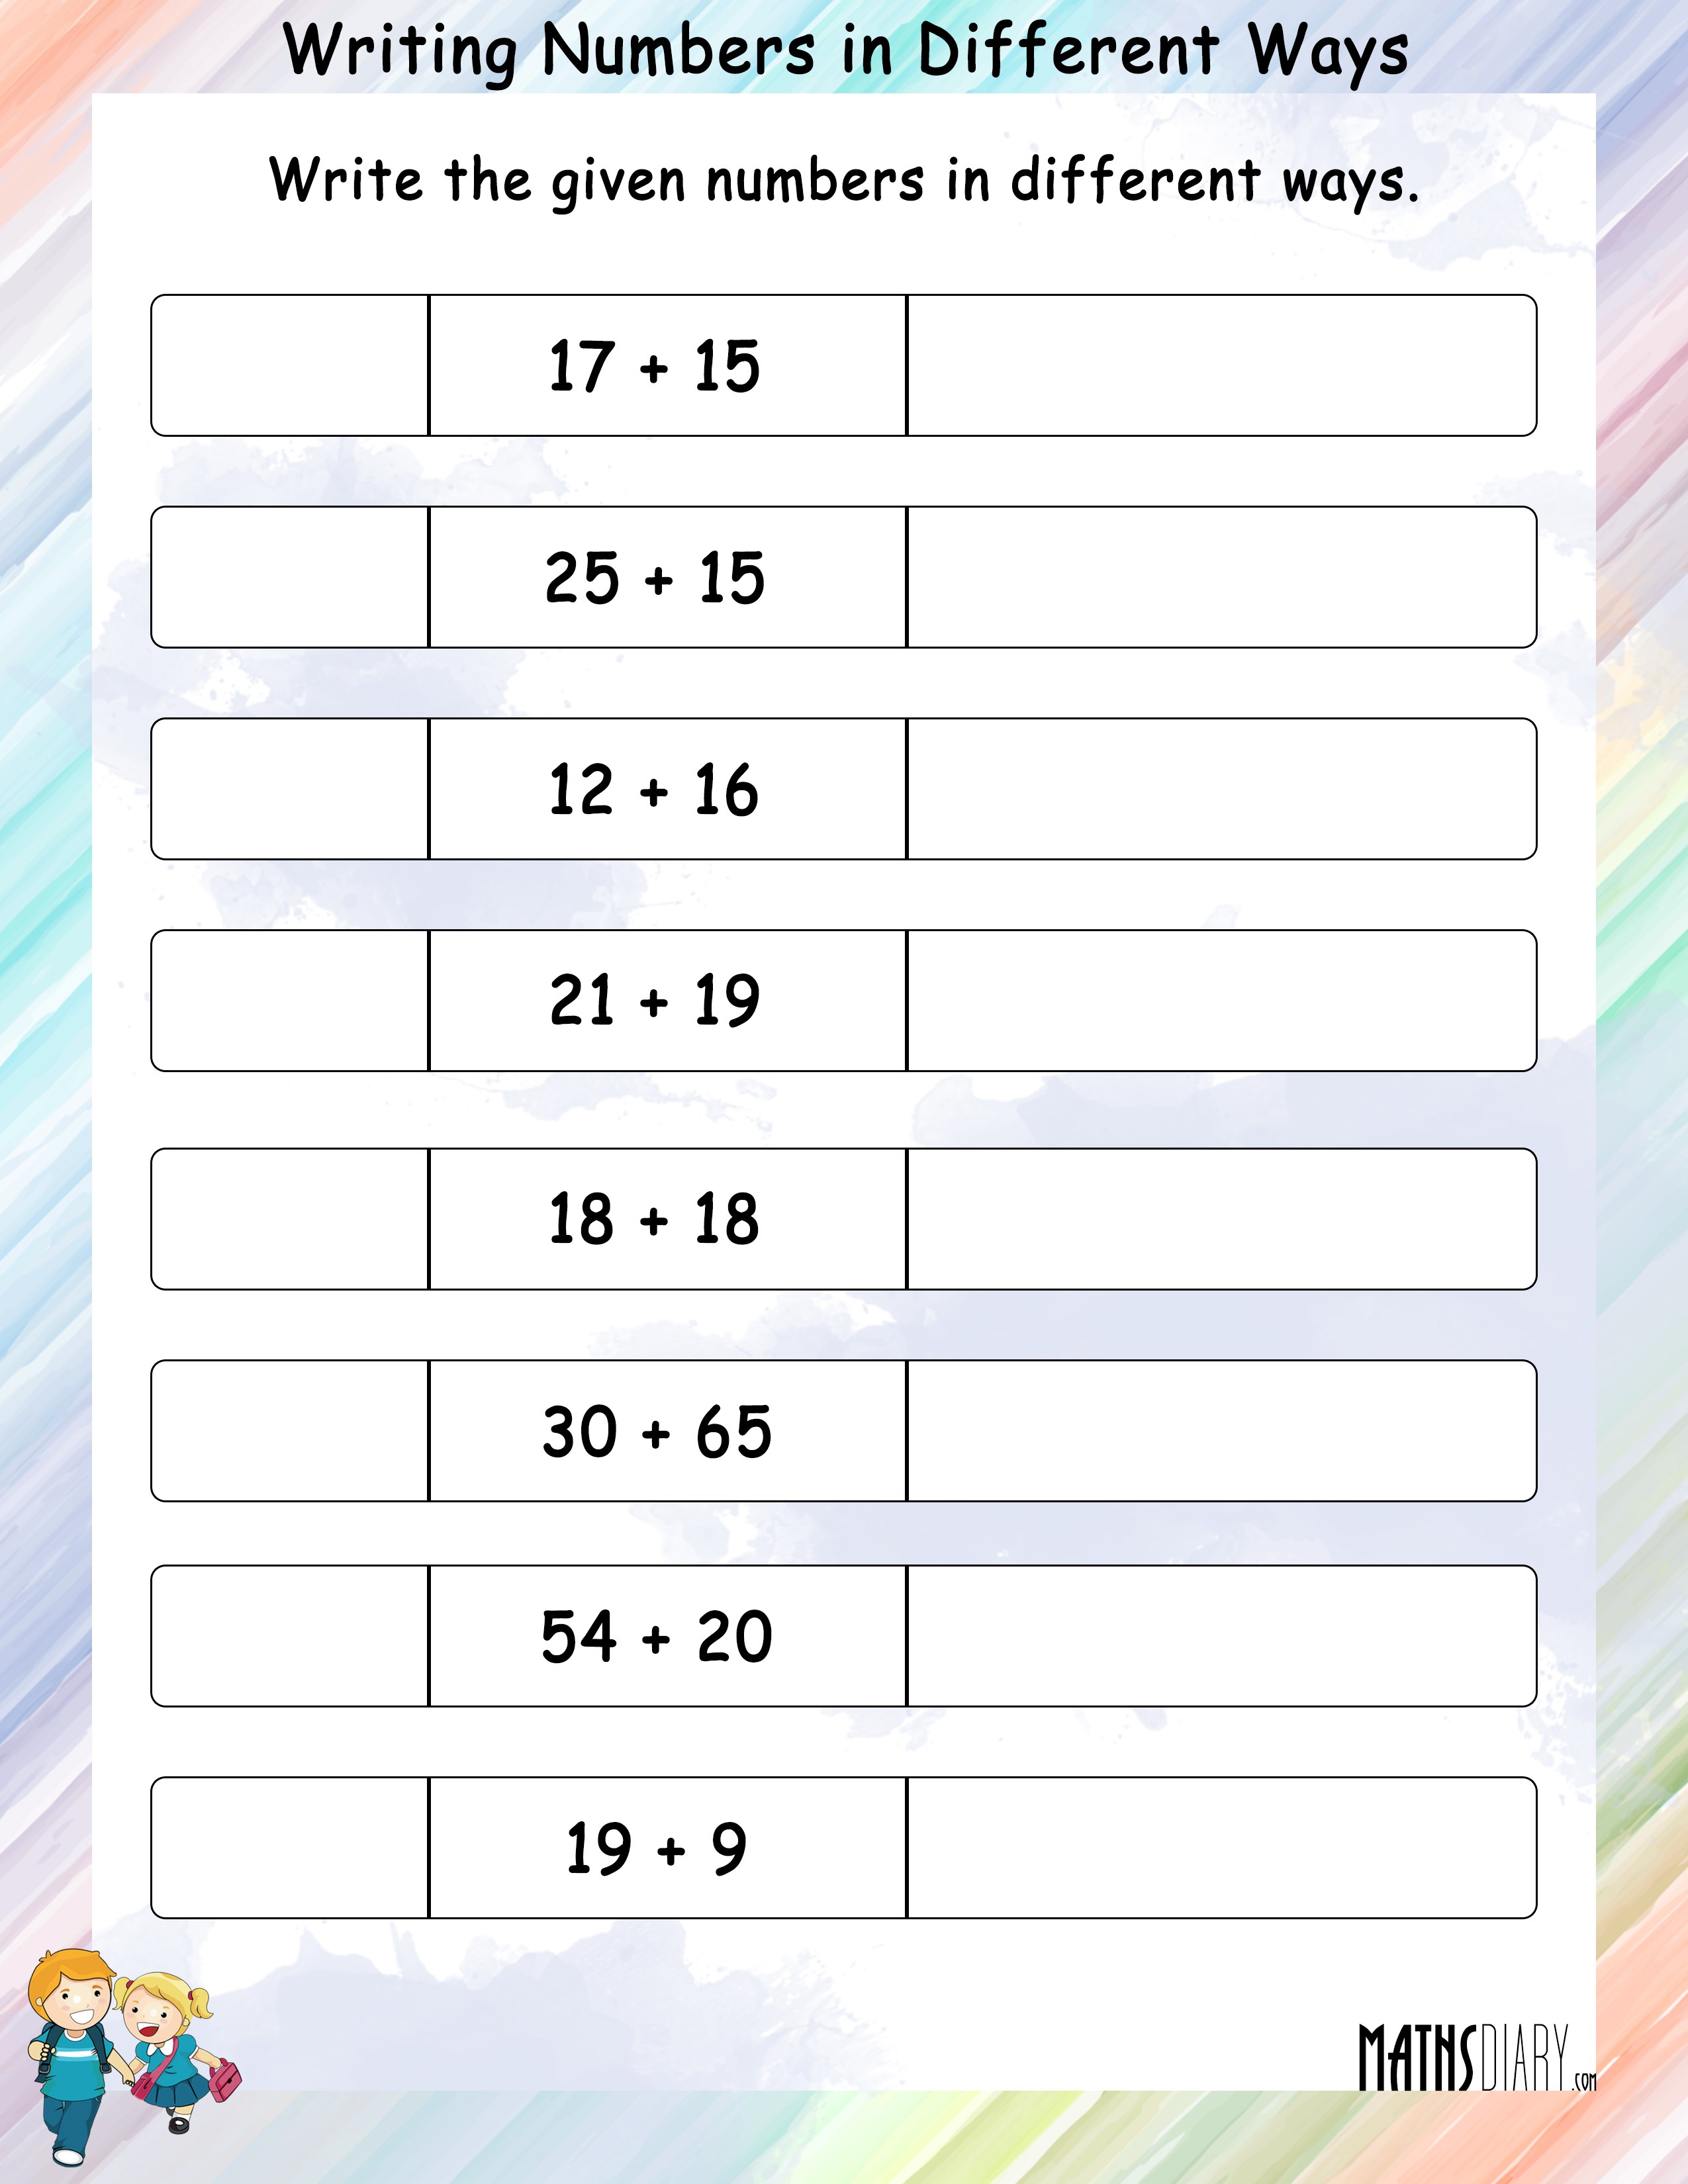 ways-to-show-numbers-11-20-math-centers-teaching-math-math-resources